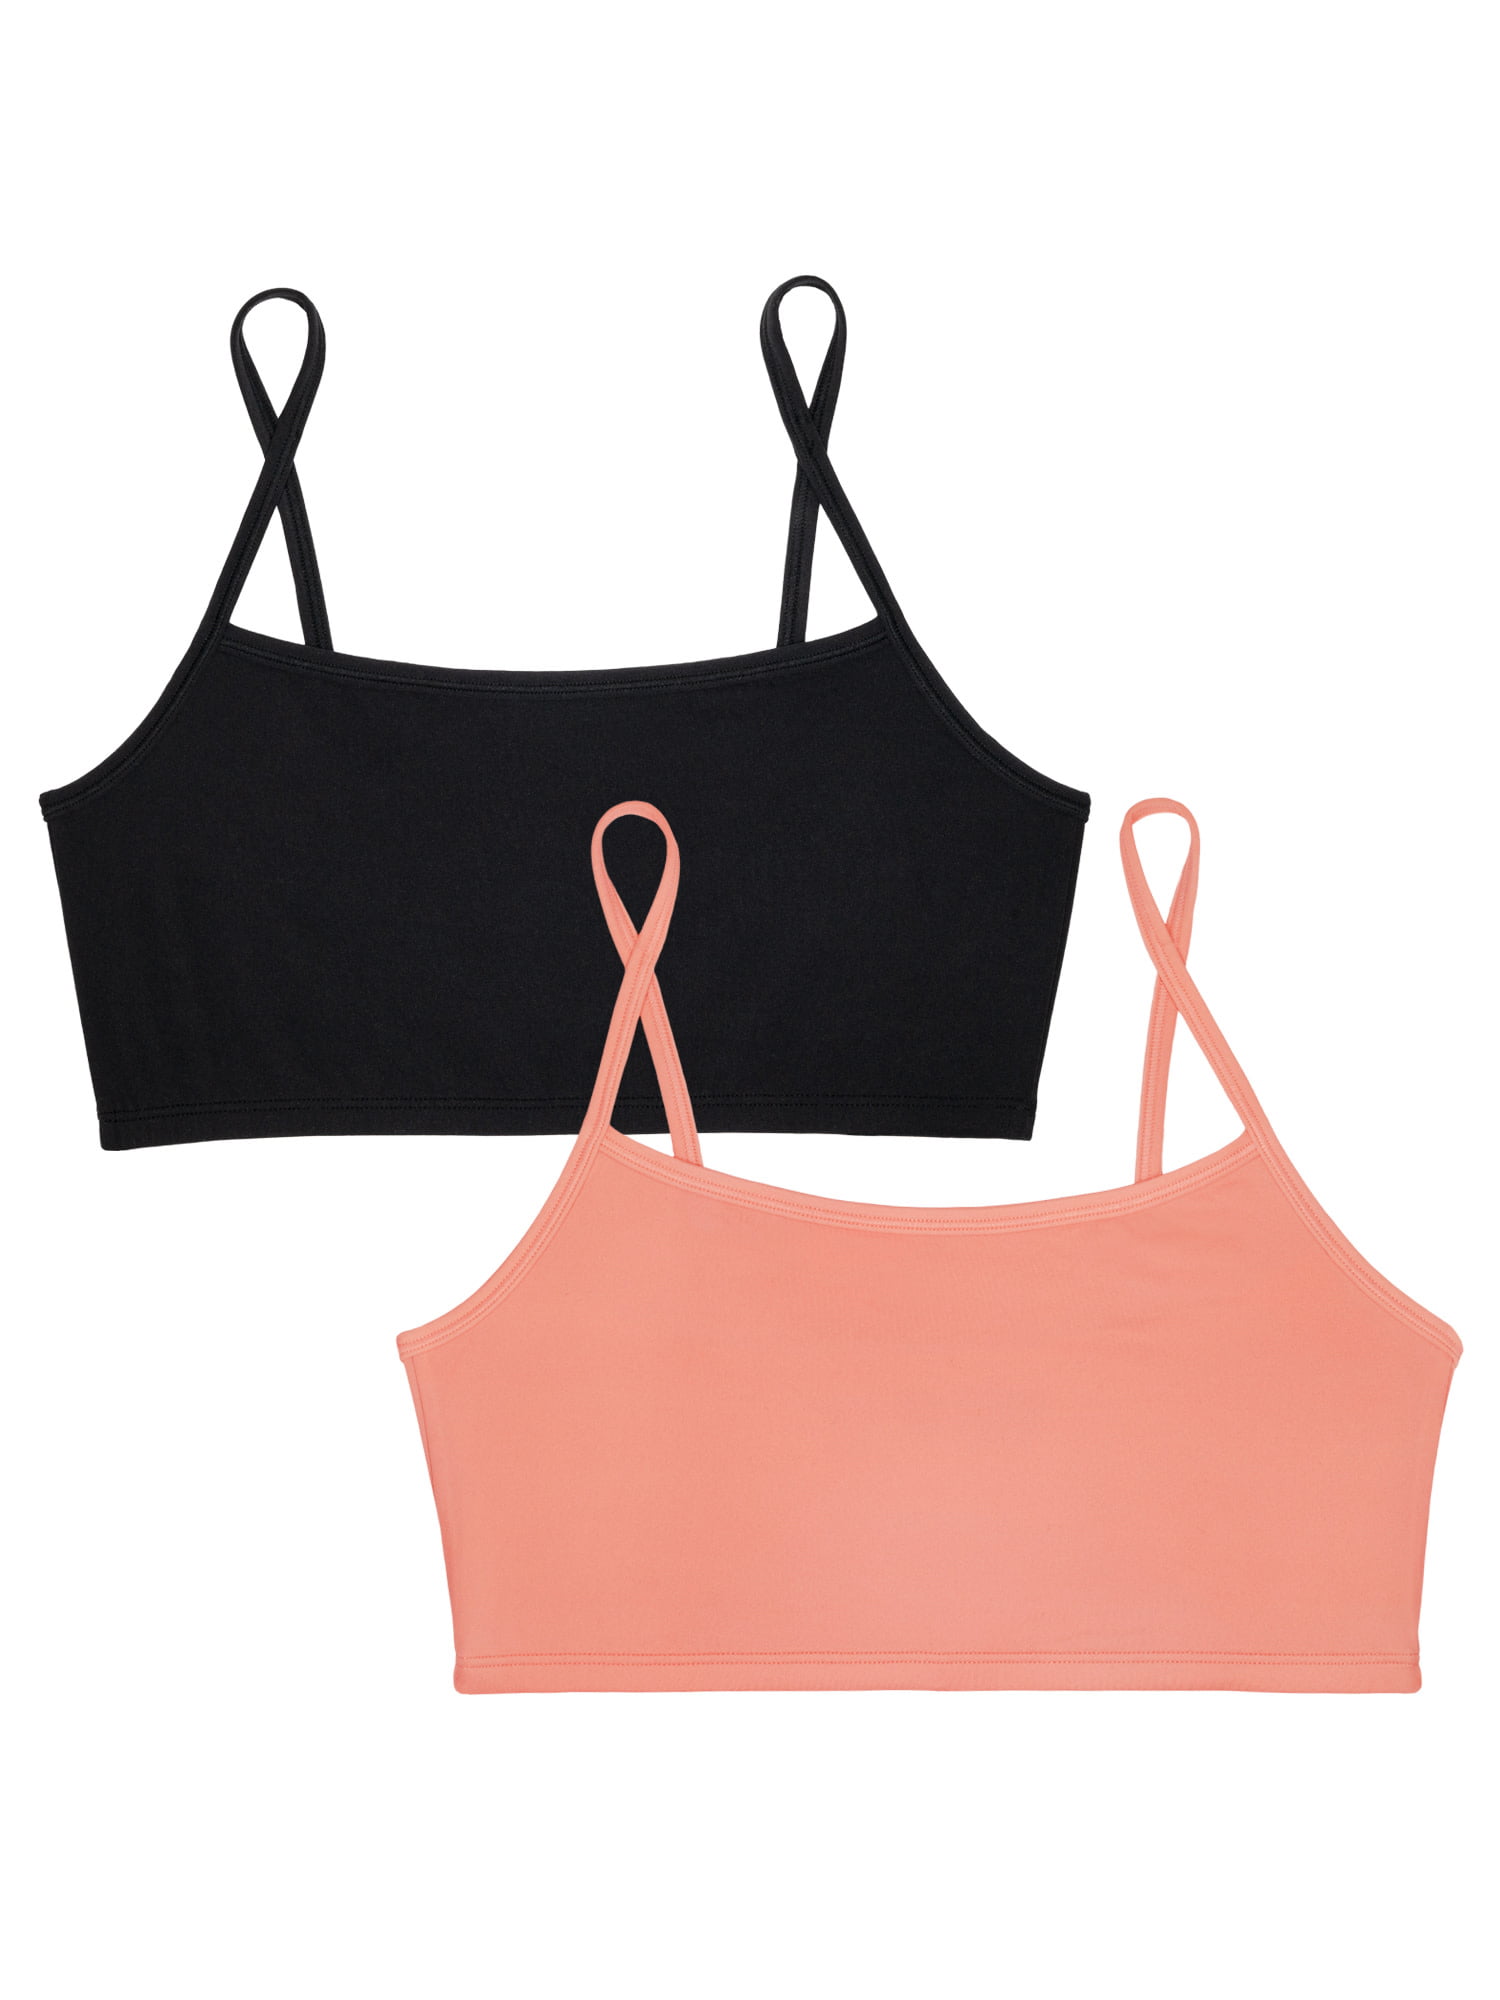 Smart & Sexy Women's Naked Cami Bralette, 2-Pack, Style-SA1437 